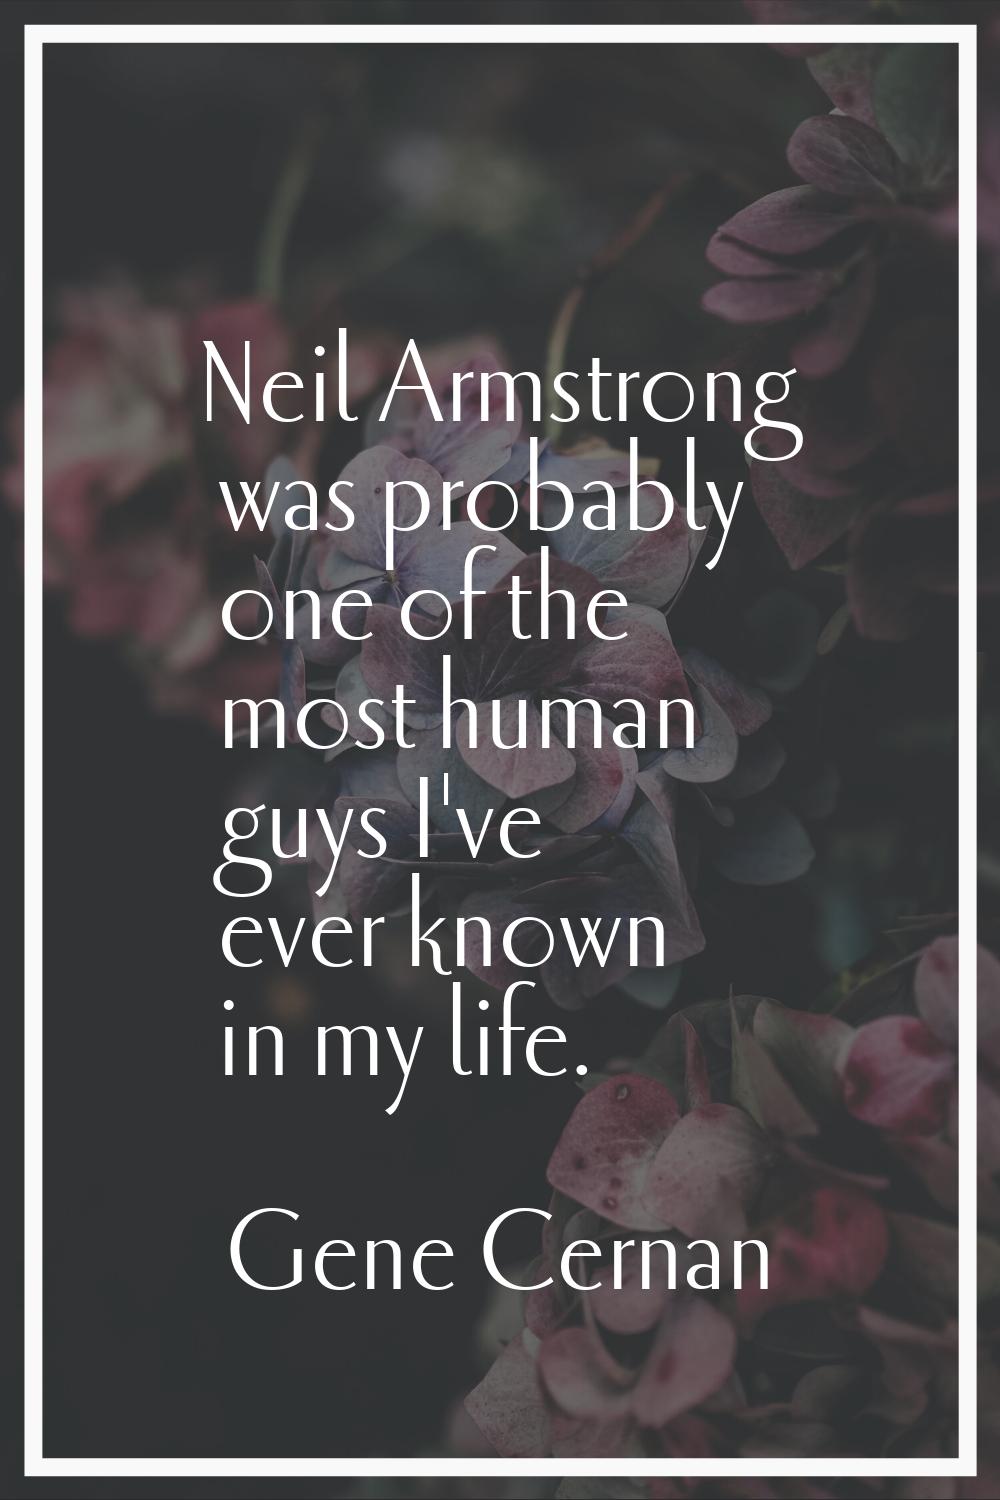 Neil Armstrong was probably one of the most human guys I've ever known in my life.